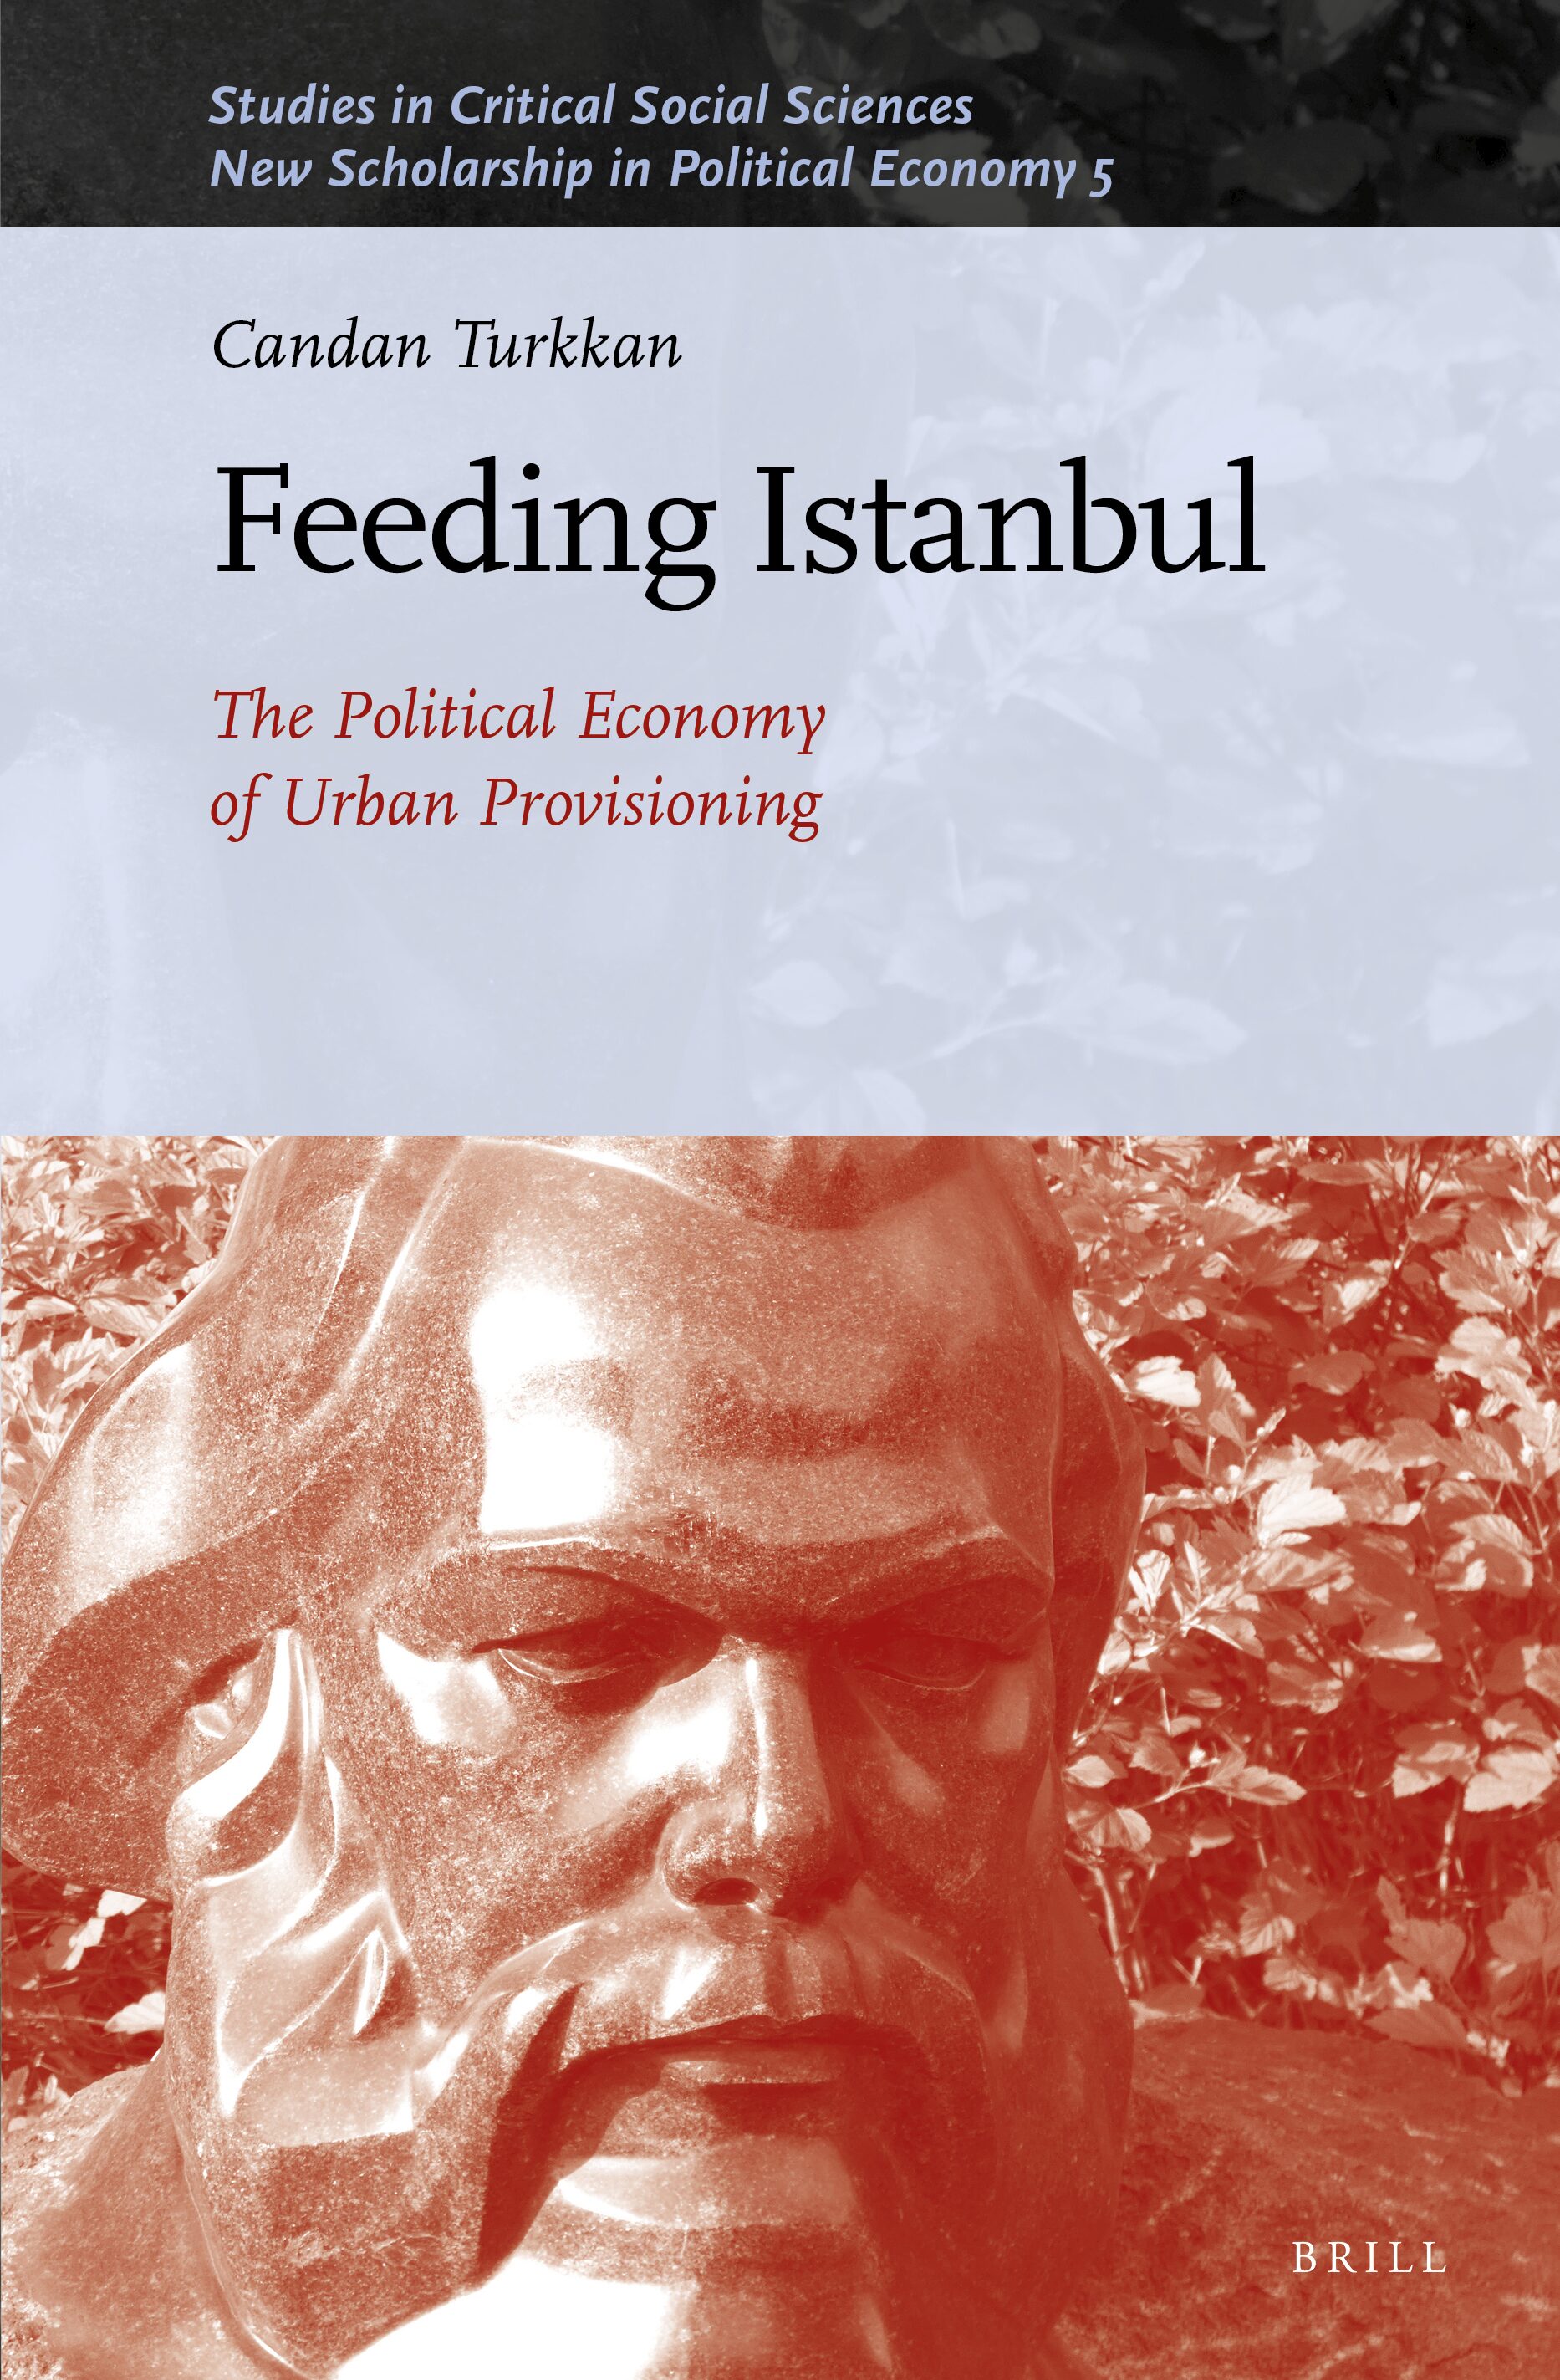 Cover of "Feeding Istanbul: The Political Economy of Urban Provisioning" by Candan Turkkan